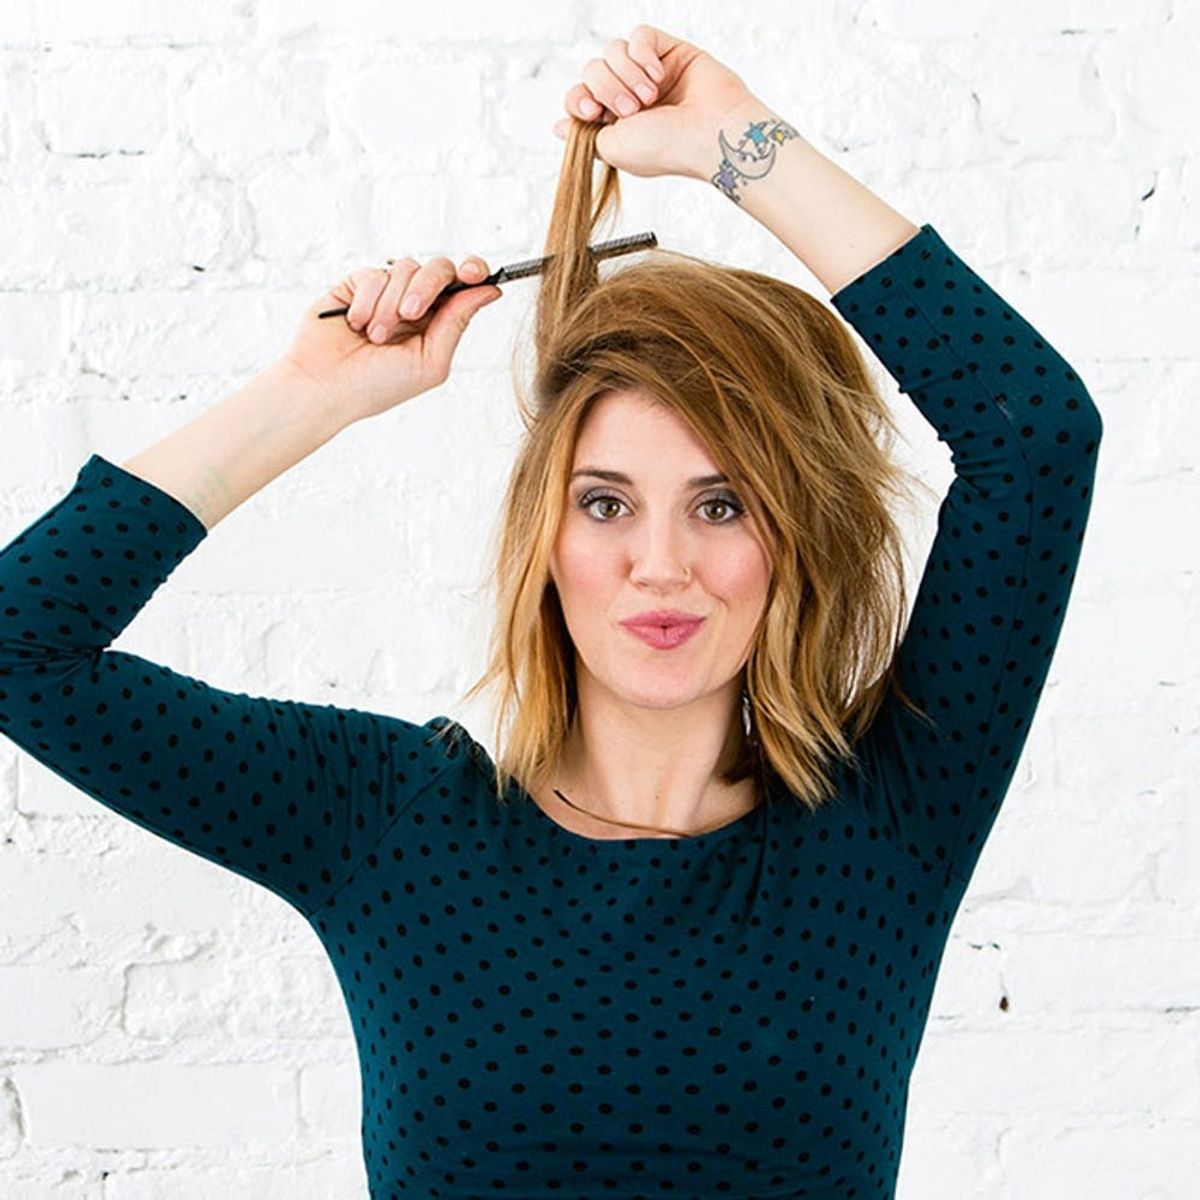 This Is the 1 Trick You Need to Make Every Hairstyle Look Better